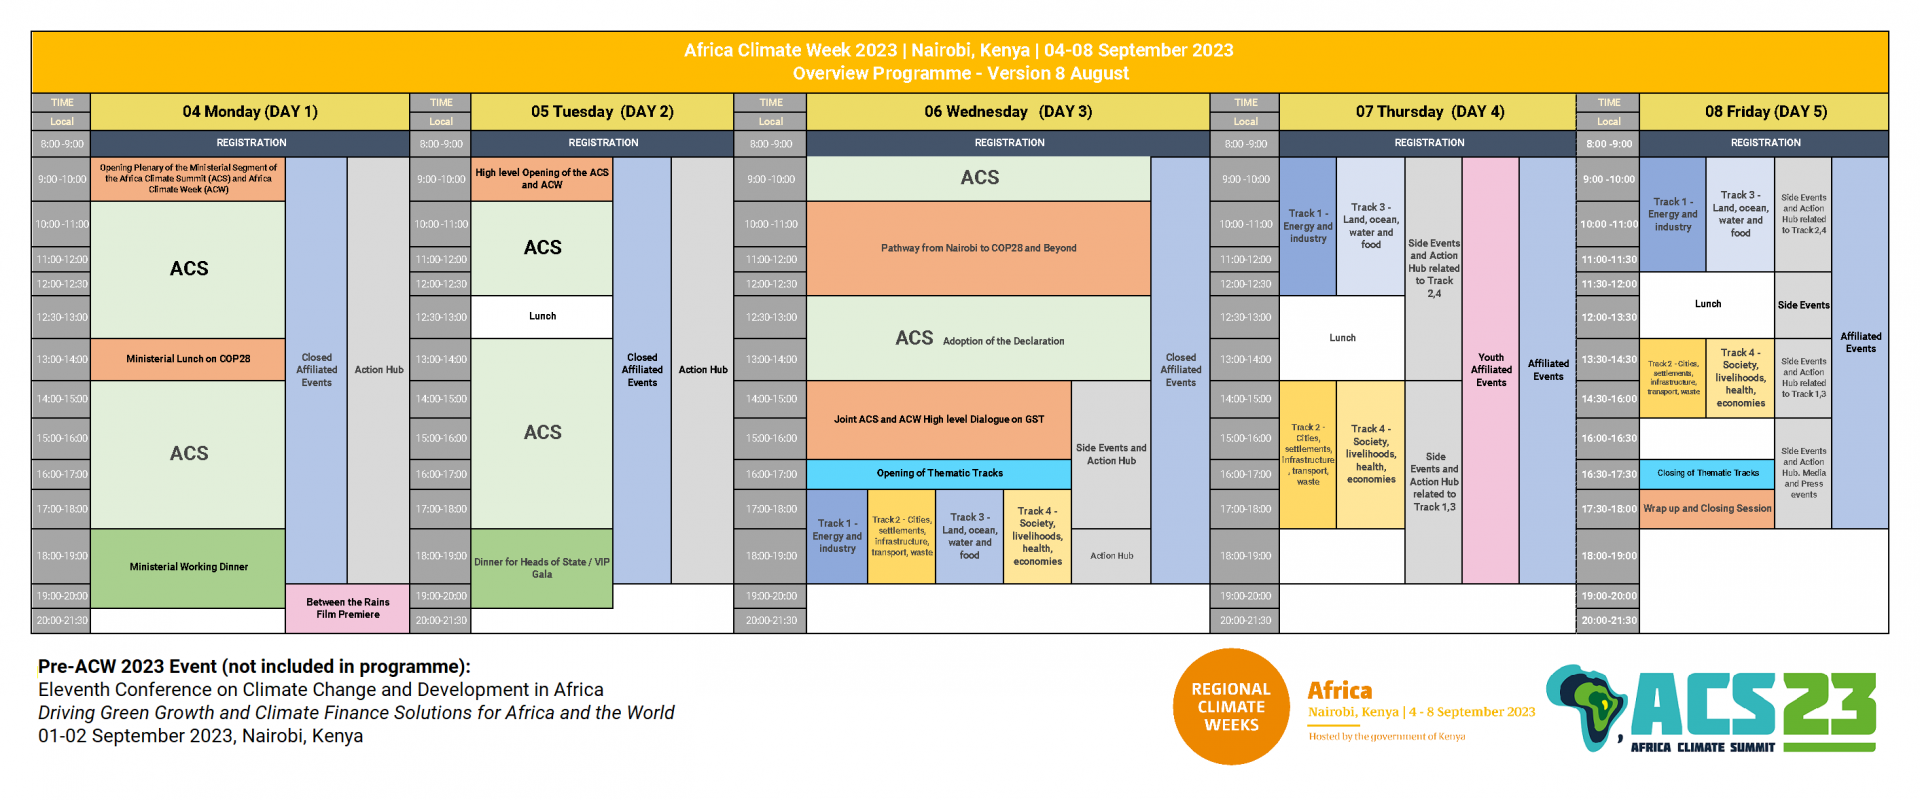 ACW 2023 Overview Programme 8 August